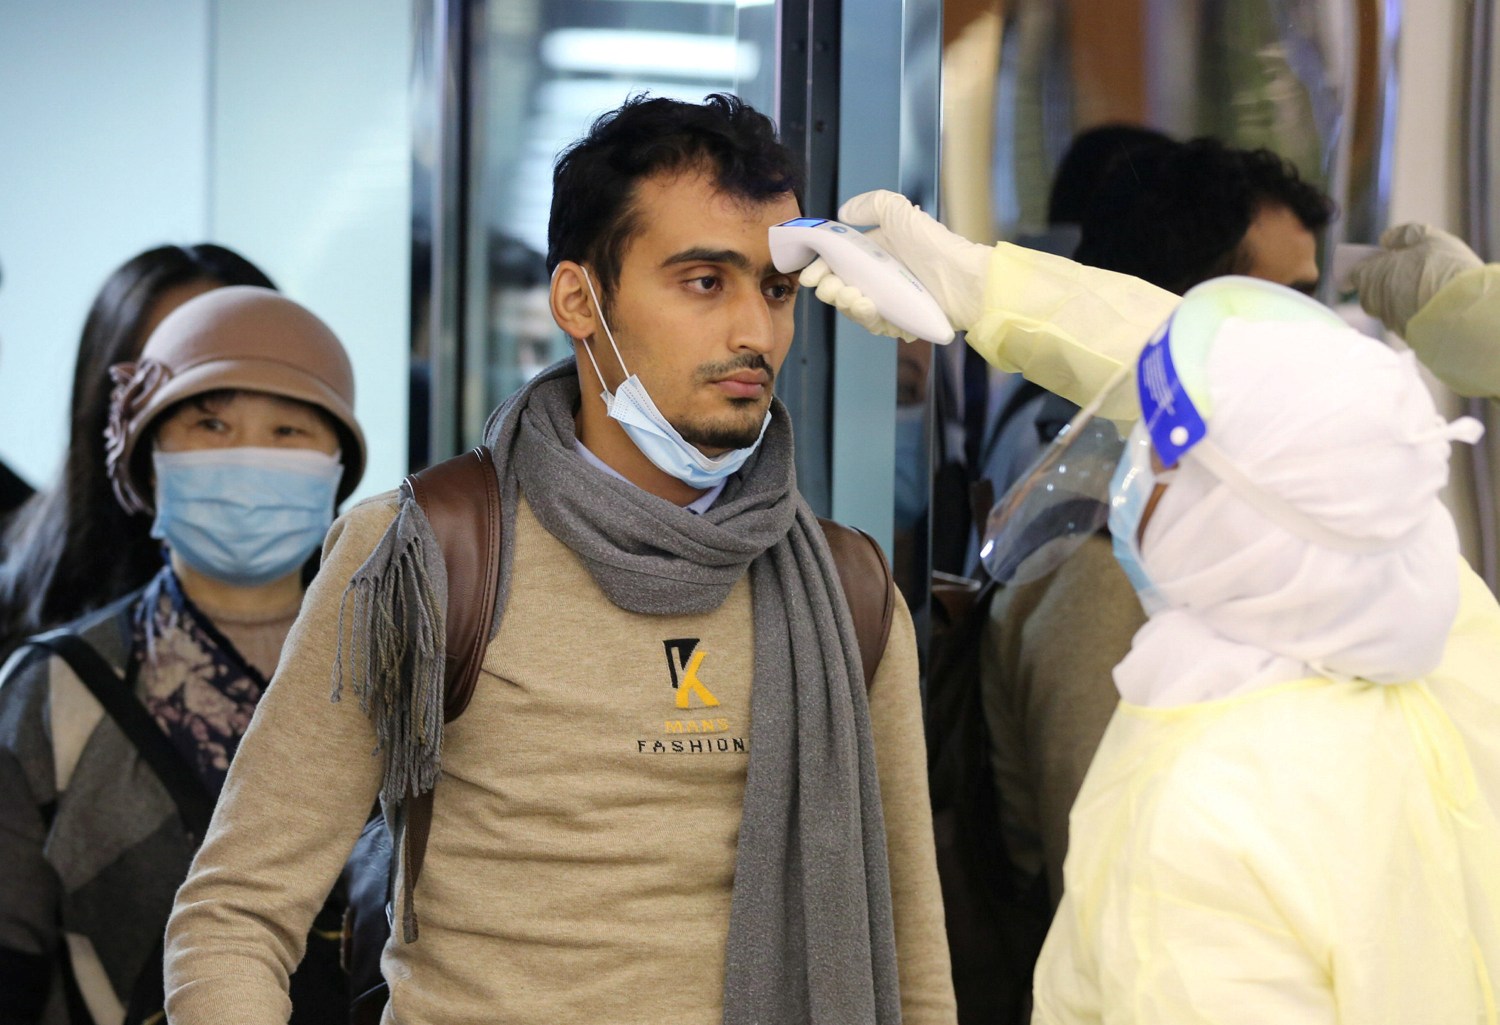 Passengers coming from China wearing masks to prevent a new coronavirus are checked by Saudi Health Ministry employees upon their arrival at King Khalid International Airport, in Riyadh, Saudi Arabia January 29, 2020. REUTERS/Ahmed Yosri